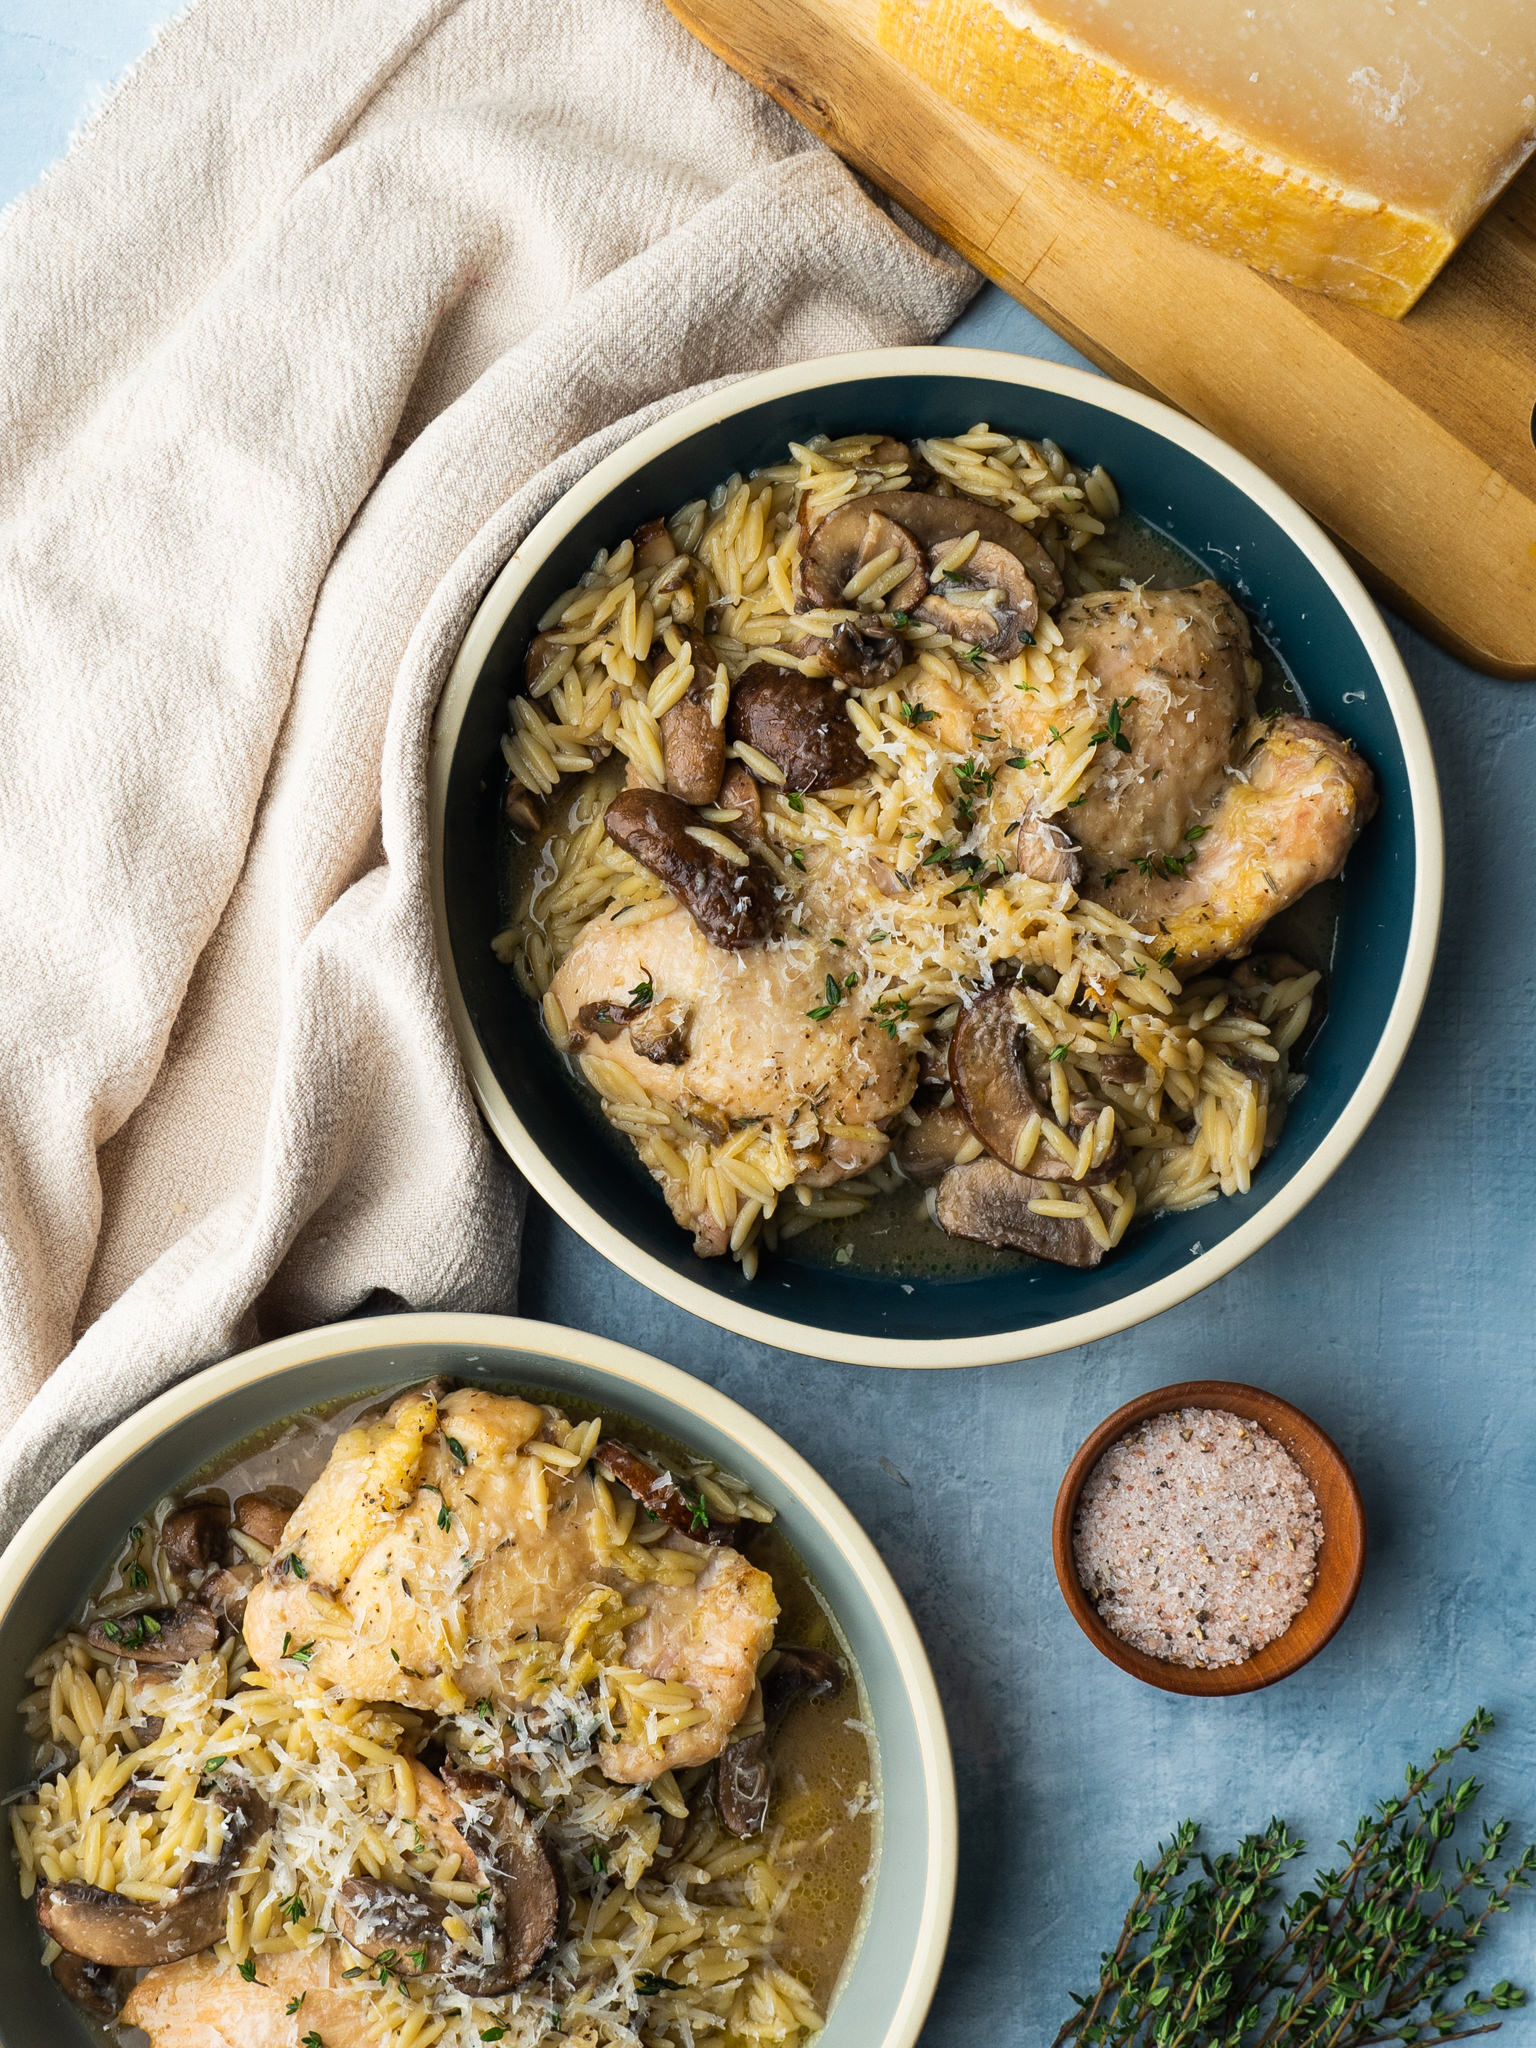 Two servings of a chicken, mushroom and orzo recipe